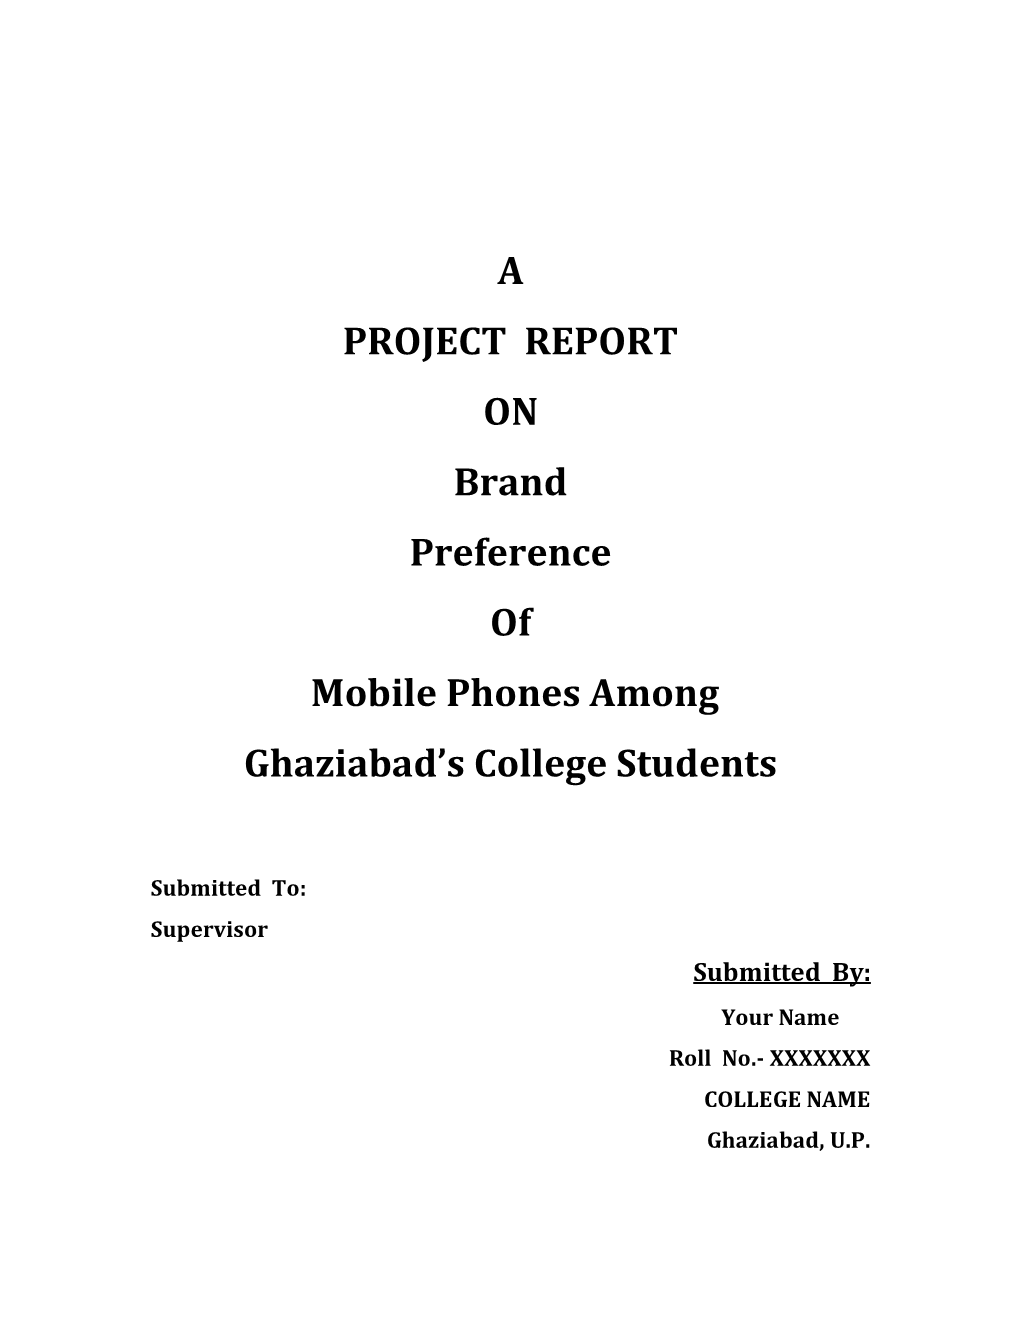 A PROJECT REPORT on Brand Preference of Mobile Phones Among Ghaziabad’S College Students